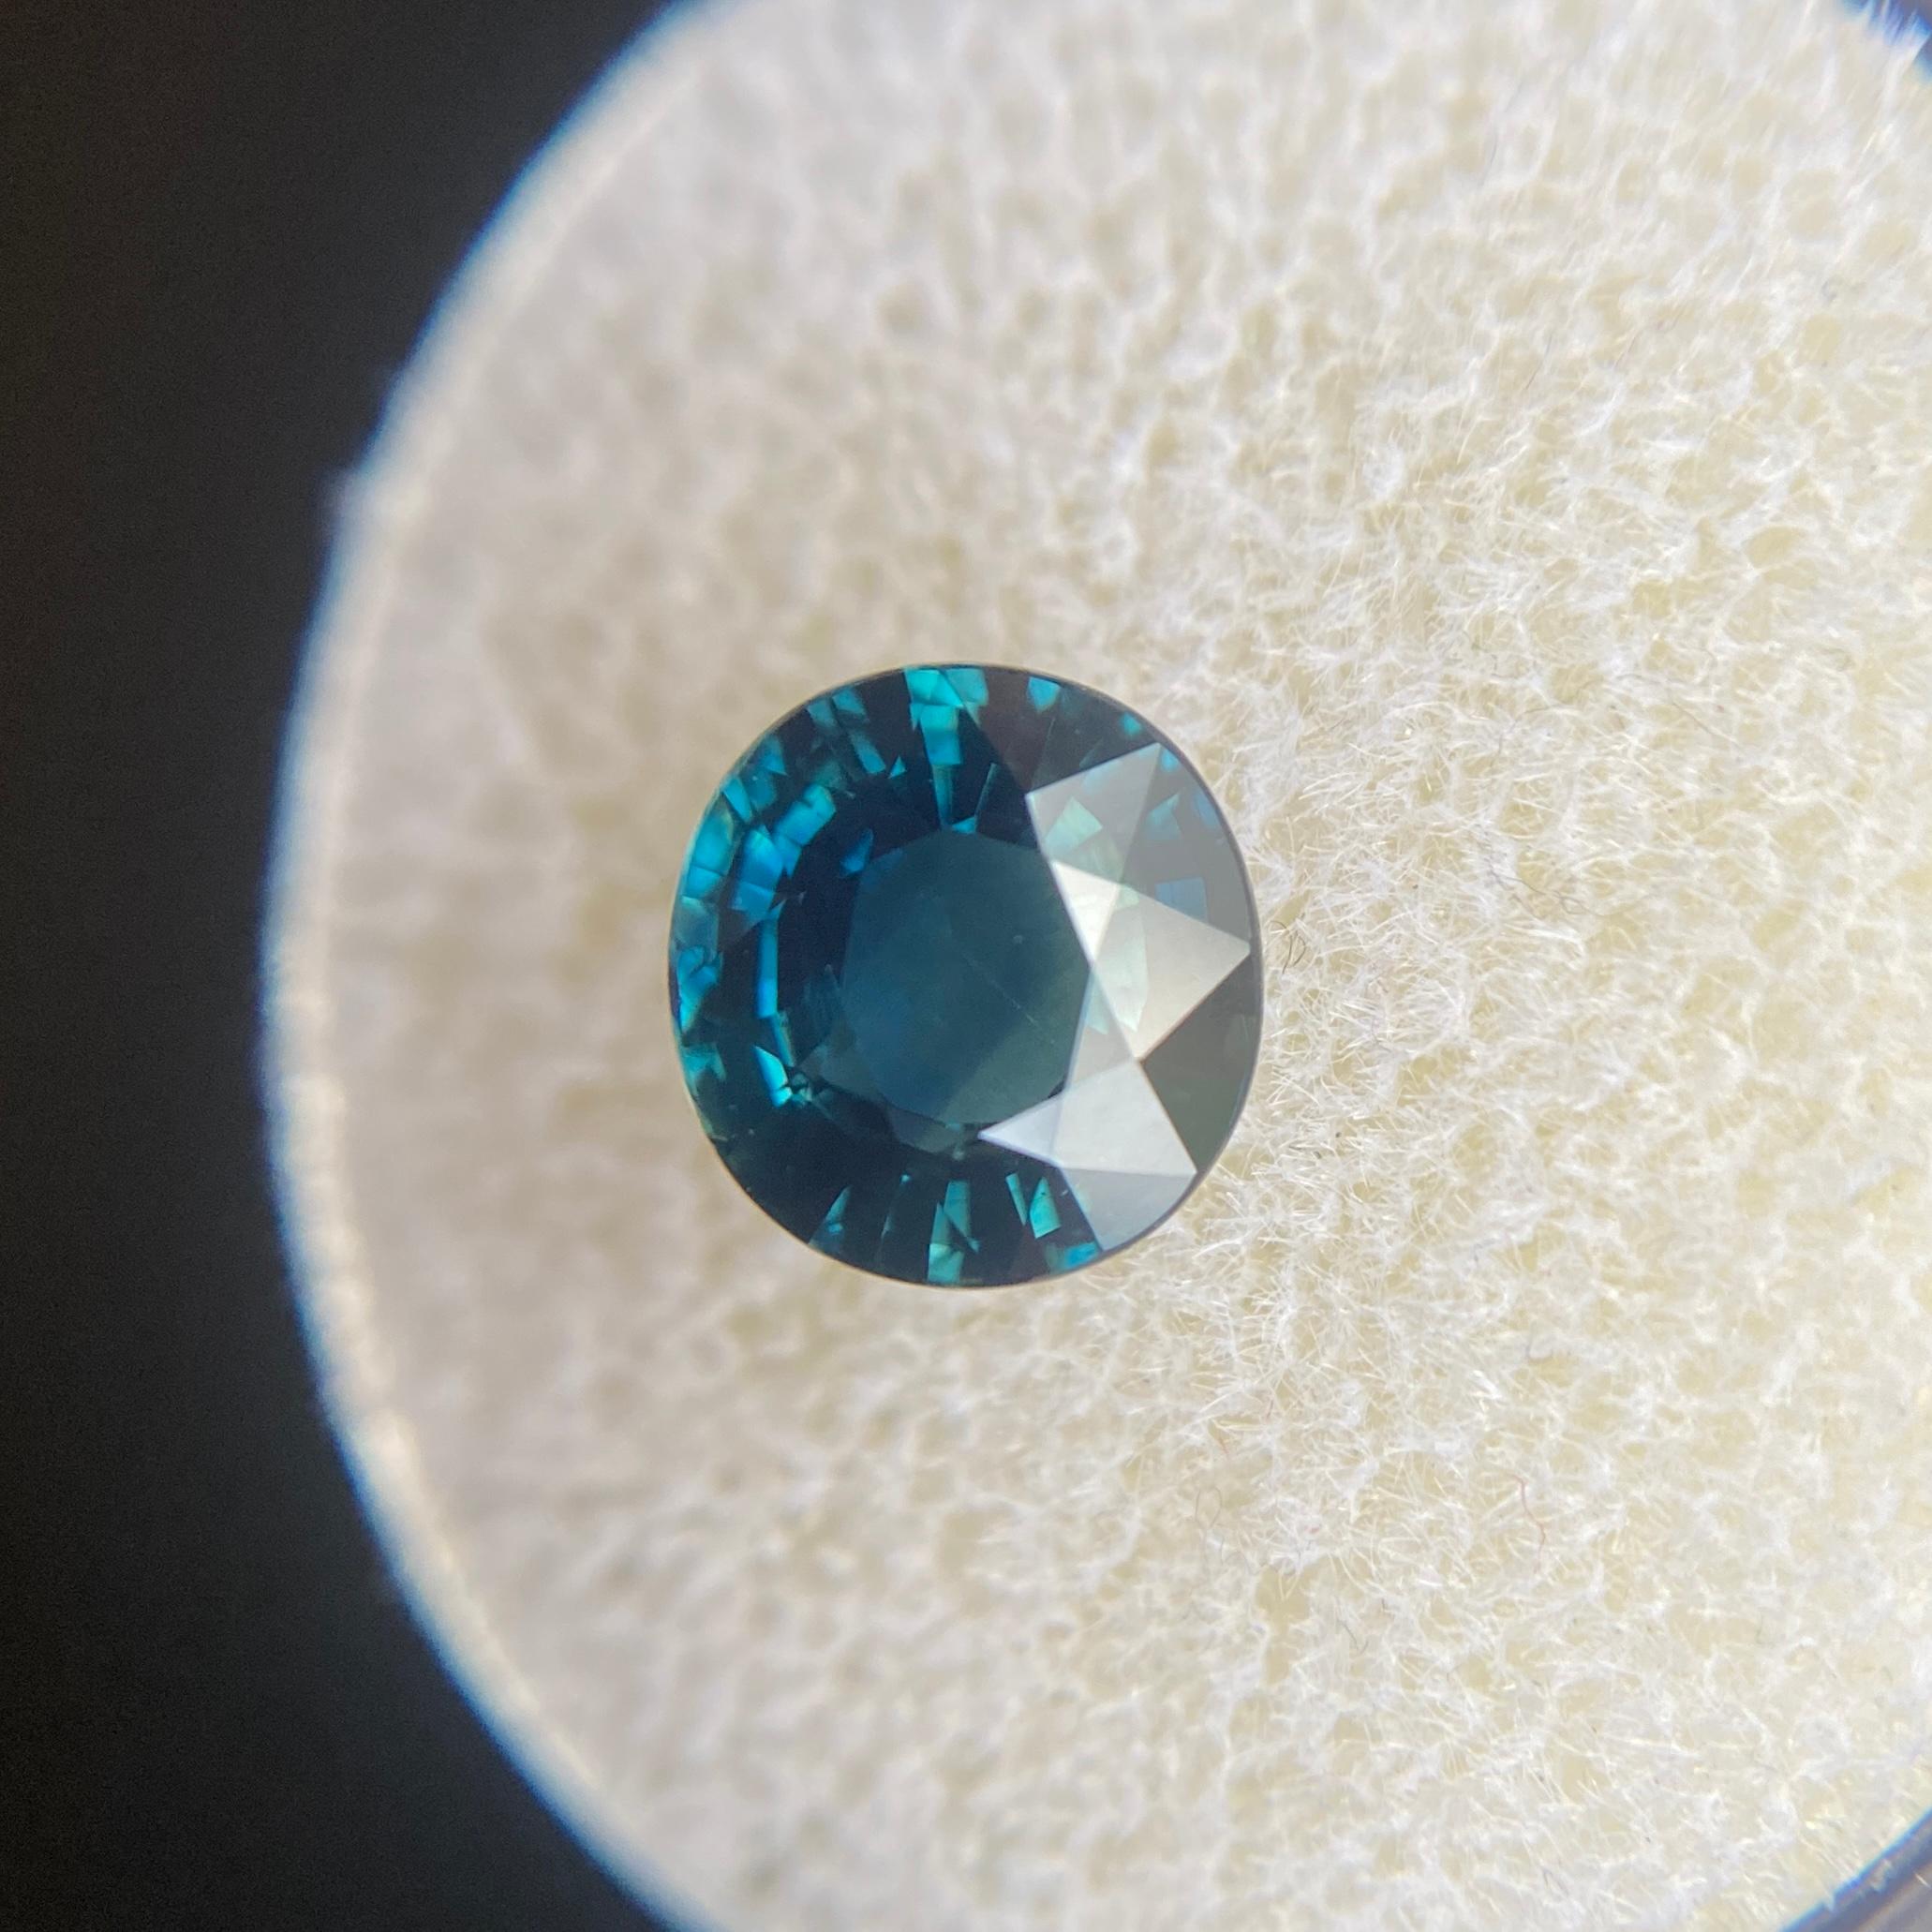 Greenish Blue ‘Teal’ Untreated Sapphire Gemstone.

Fine quality unheated sapphire with a beautiful greenish blue ‘teal’ colour. Fully certified by GIA confirming stone as natural and untreated. Very rare for natural sapphires.

2.08 Carat with